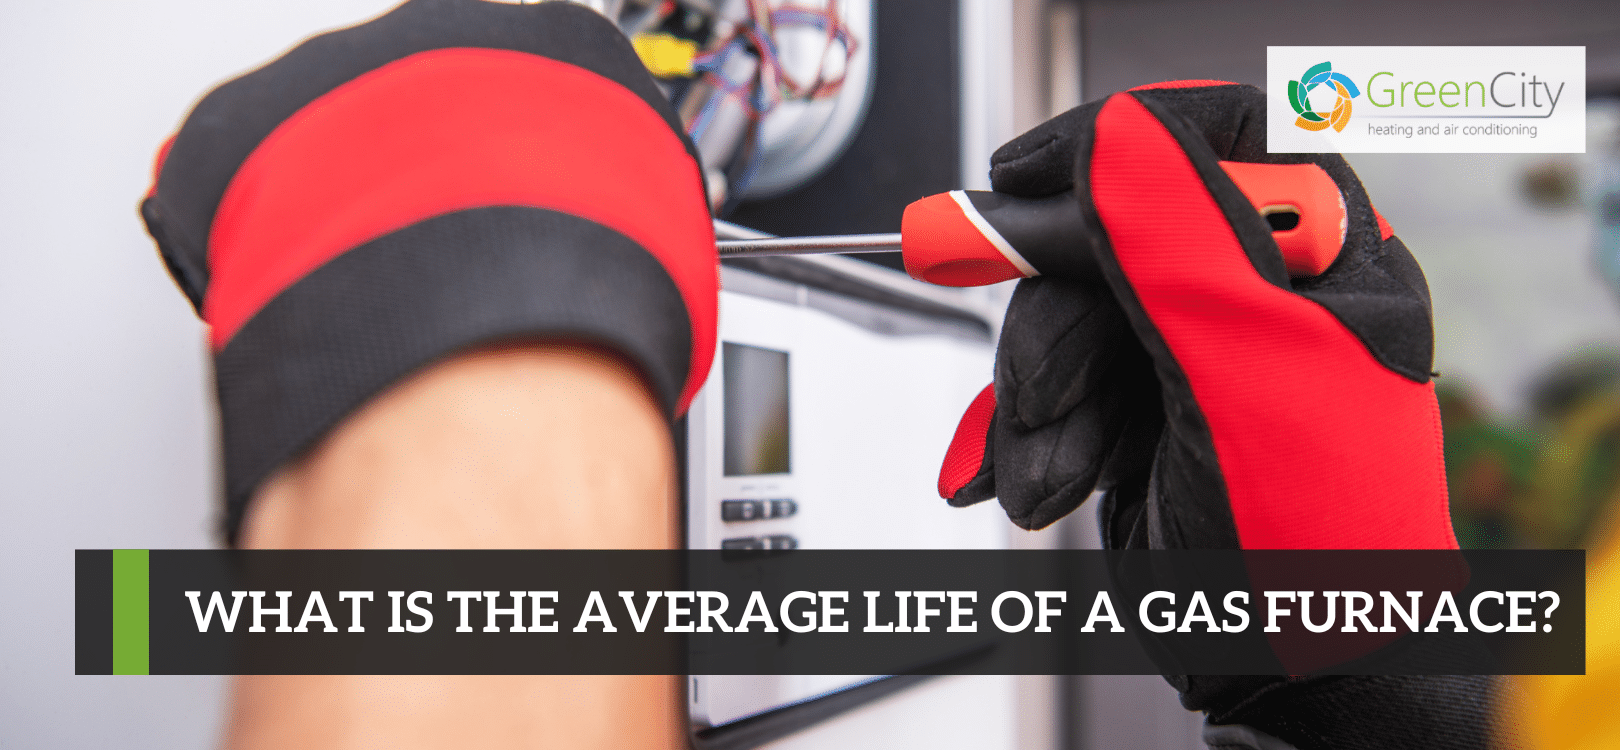 What is the Average Life of a Gas Furnace